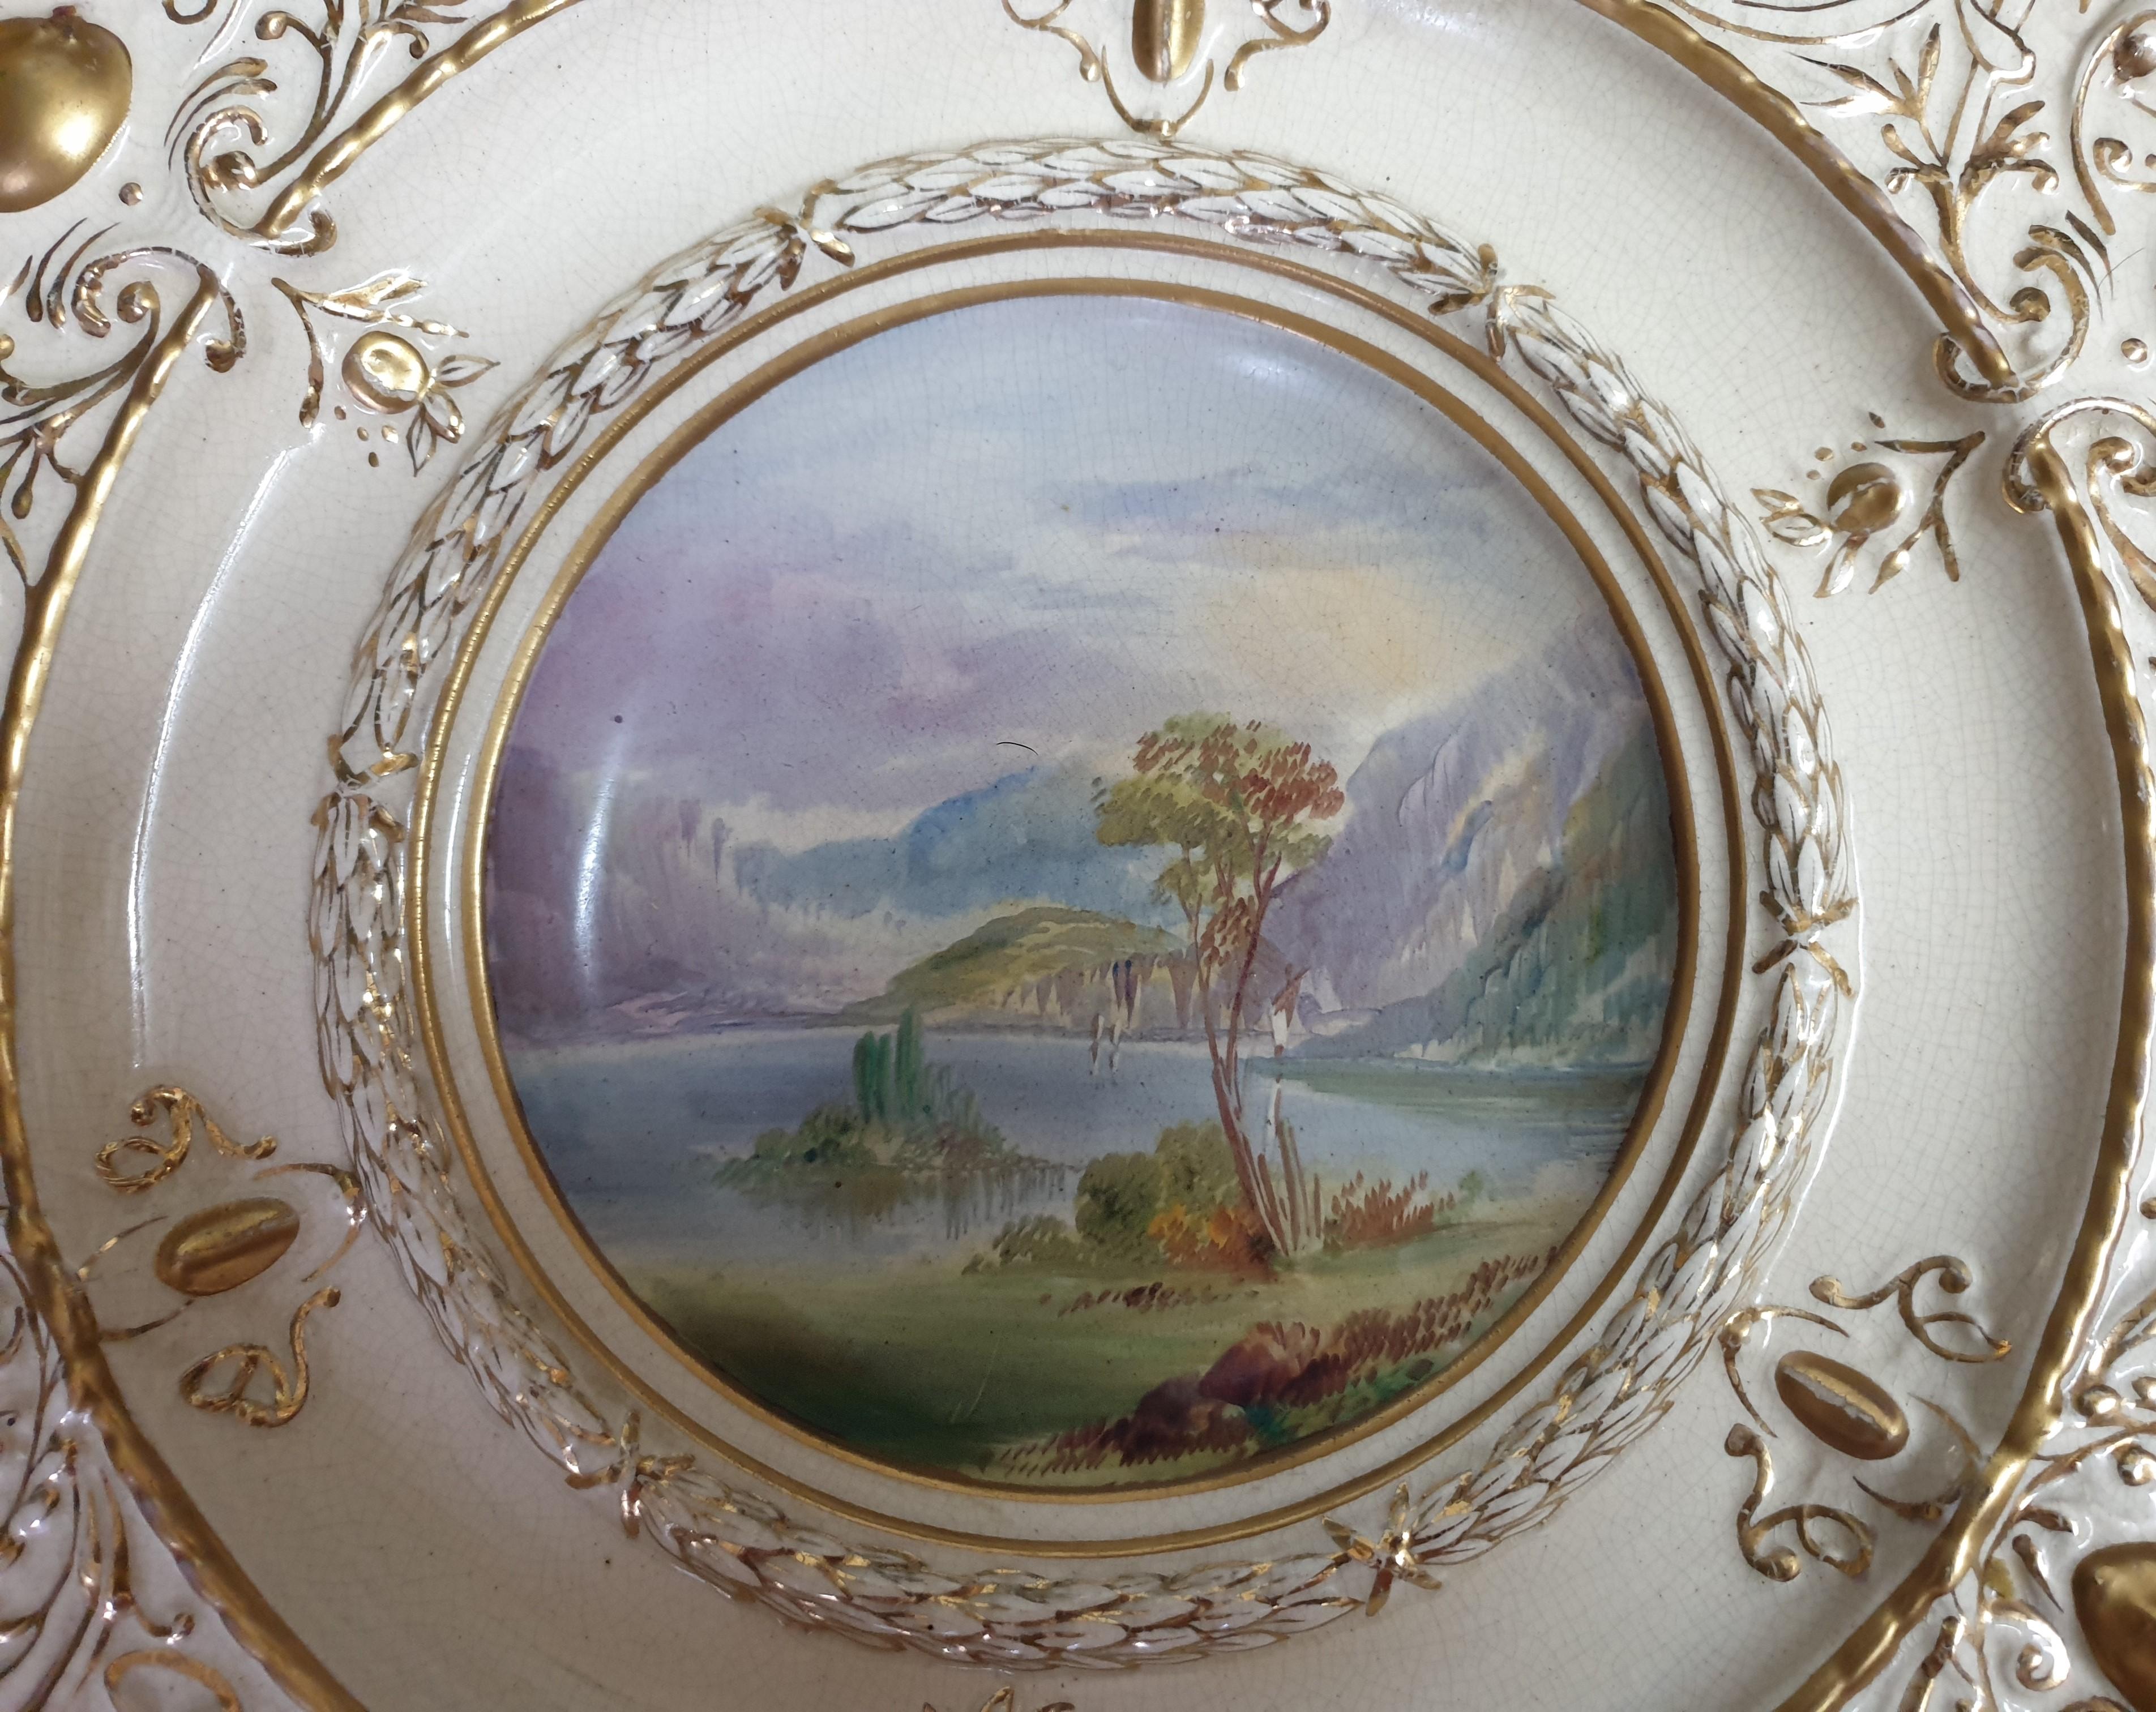 A large Wall decorative charger depicting a lakeside scene with a mountainous backdrop. The scene is handpainted on transfer a technique used to make handpainted porcelain more affordable. The rim is highly decorated with gilt featuring scarabs,